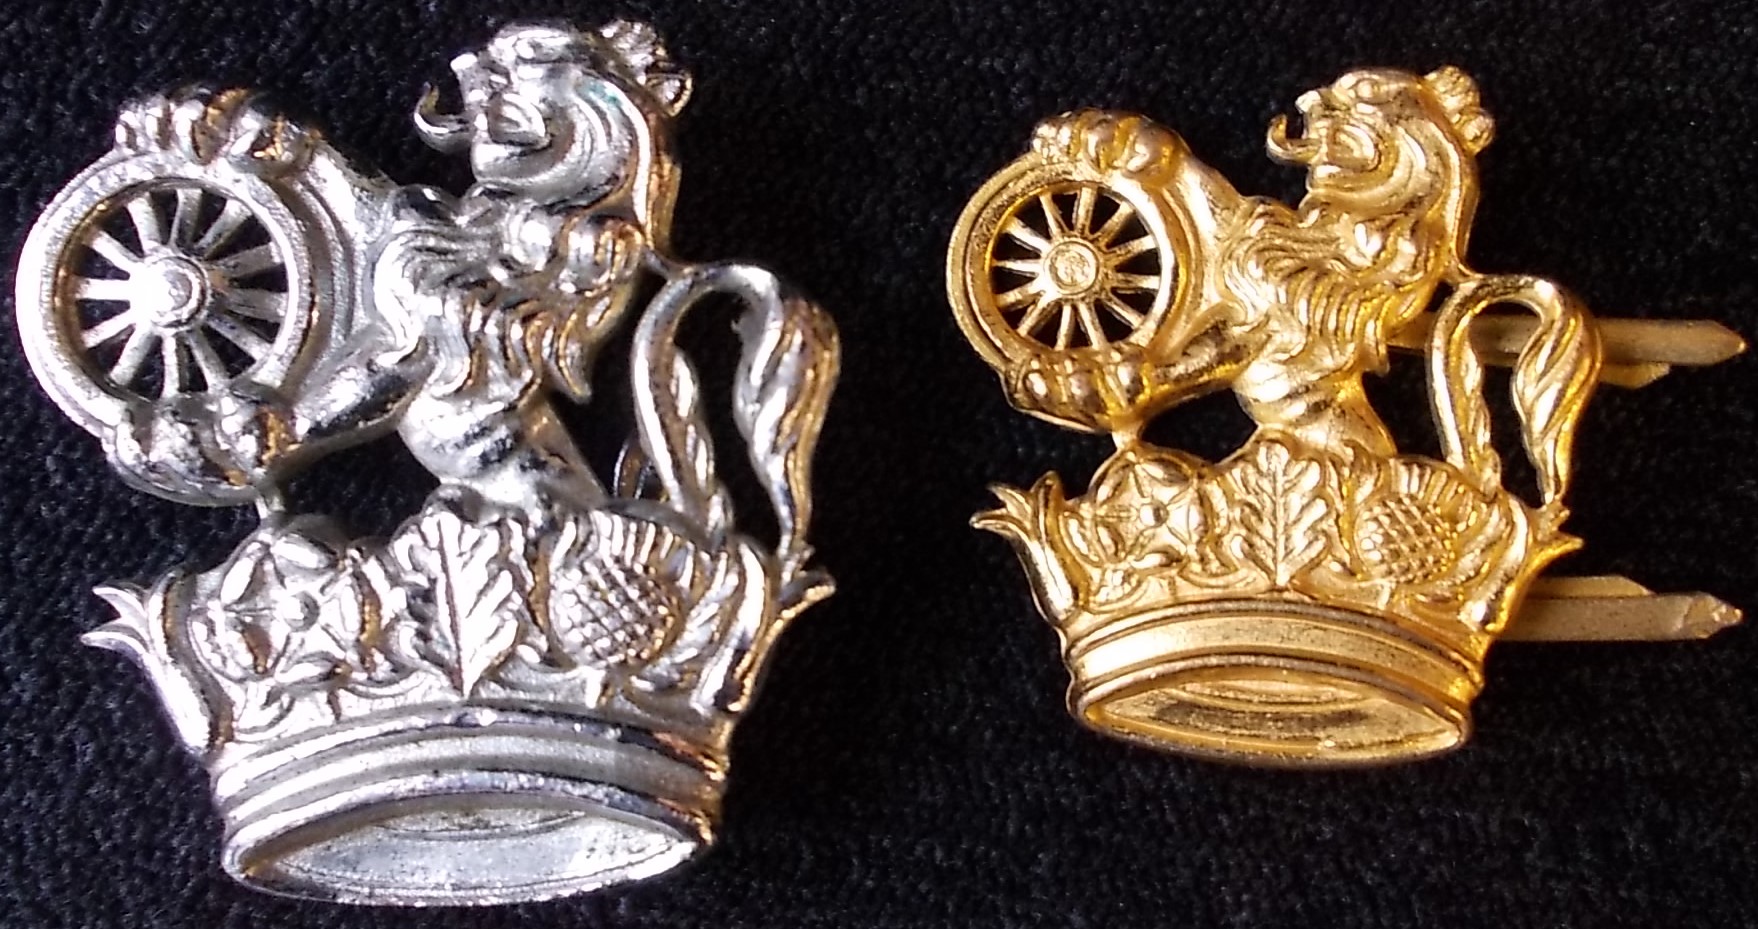 (2) Railwayana. Chromed B.R. cap badge. Another smaller brass badge with prong fittings.